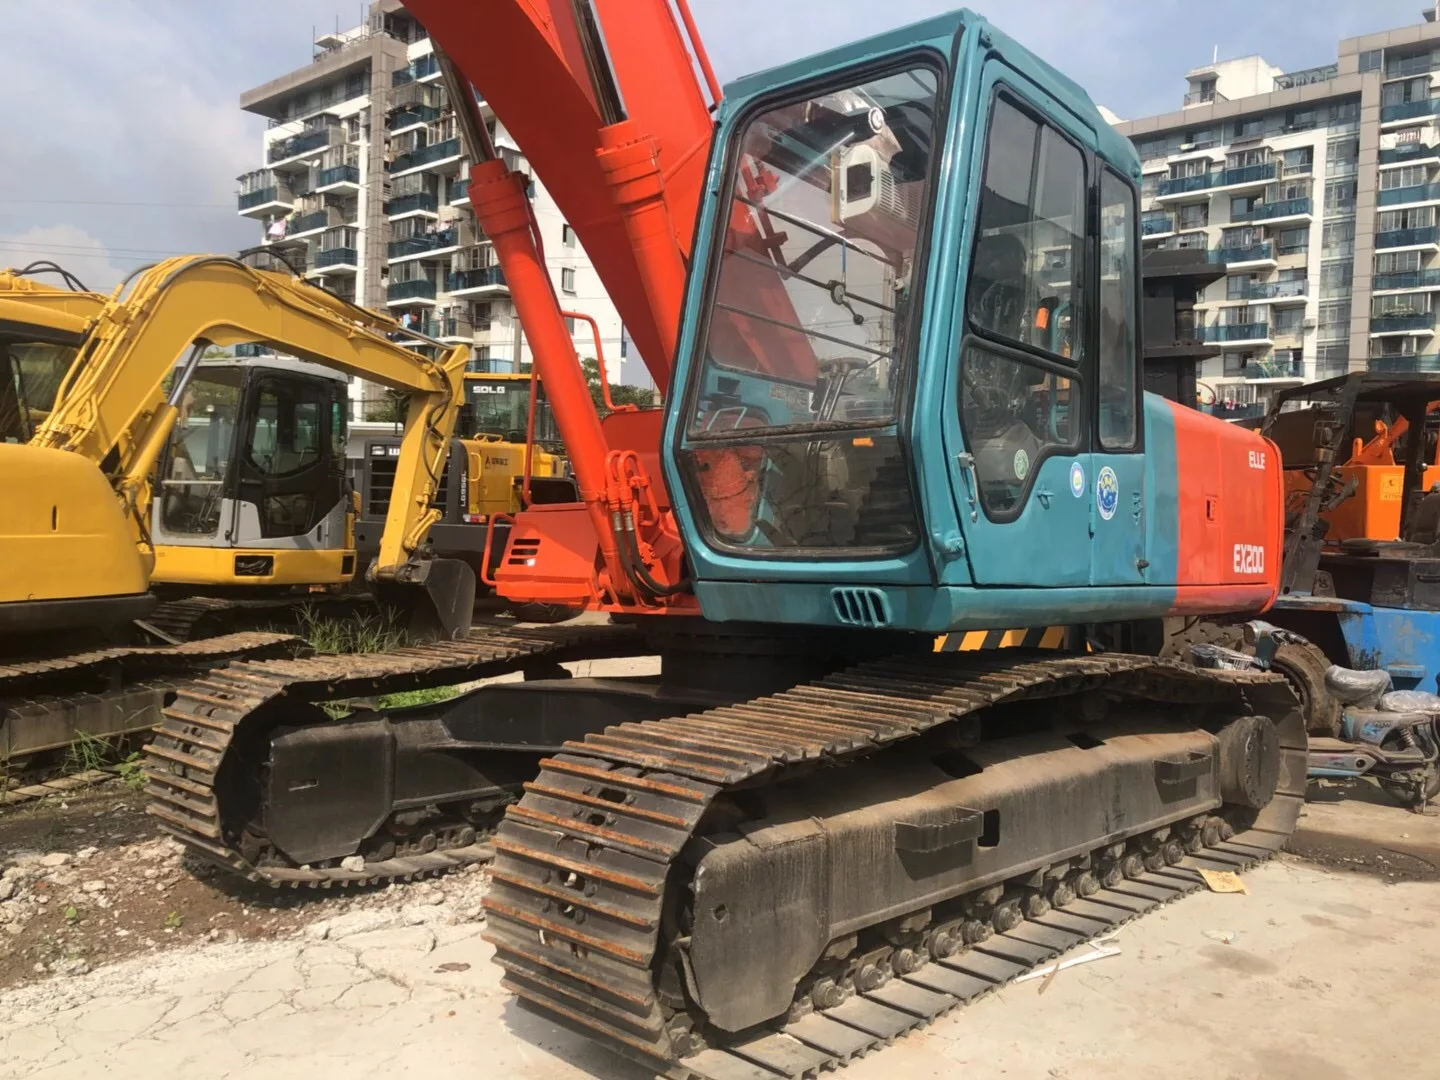 Used Japan Kobelco Sk200lc-5 Sk200-8/sk200-6/sk200-5 Chain Excavator - Buy  Cat 320v Excavator,Used Condition 320b 325c 320d 320cu,320cu 312b 336d 330d  Crawler Excavator For Sale Product on Alibaba.com